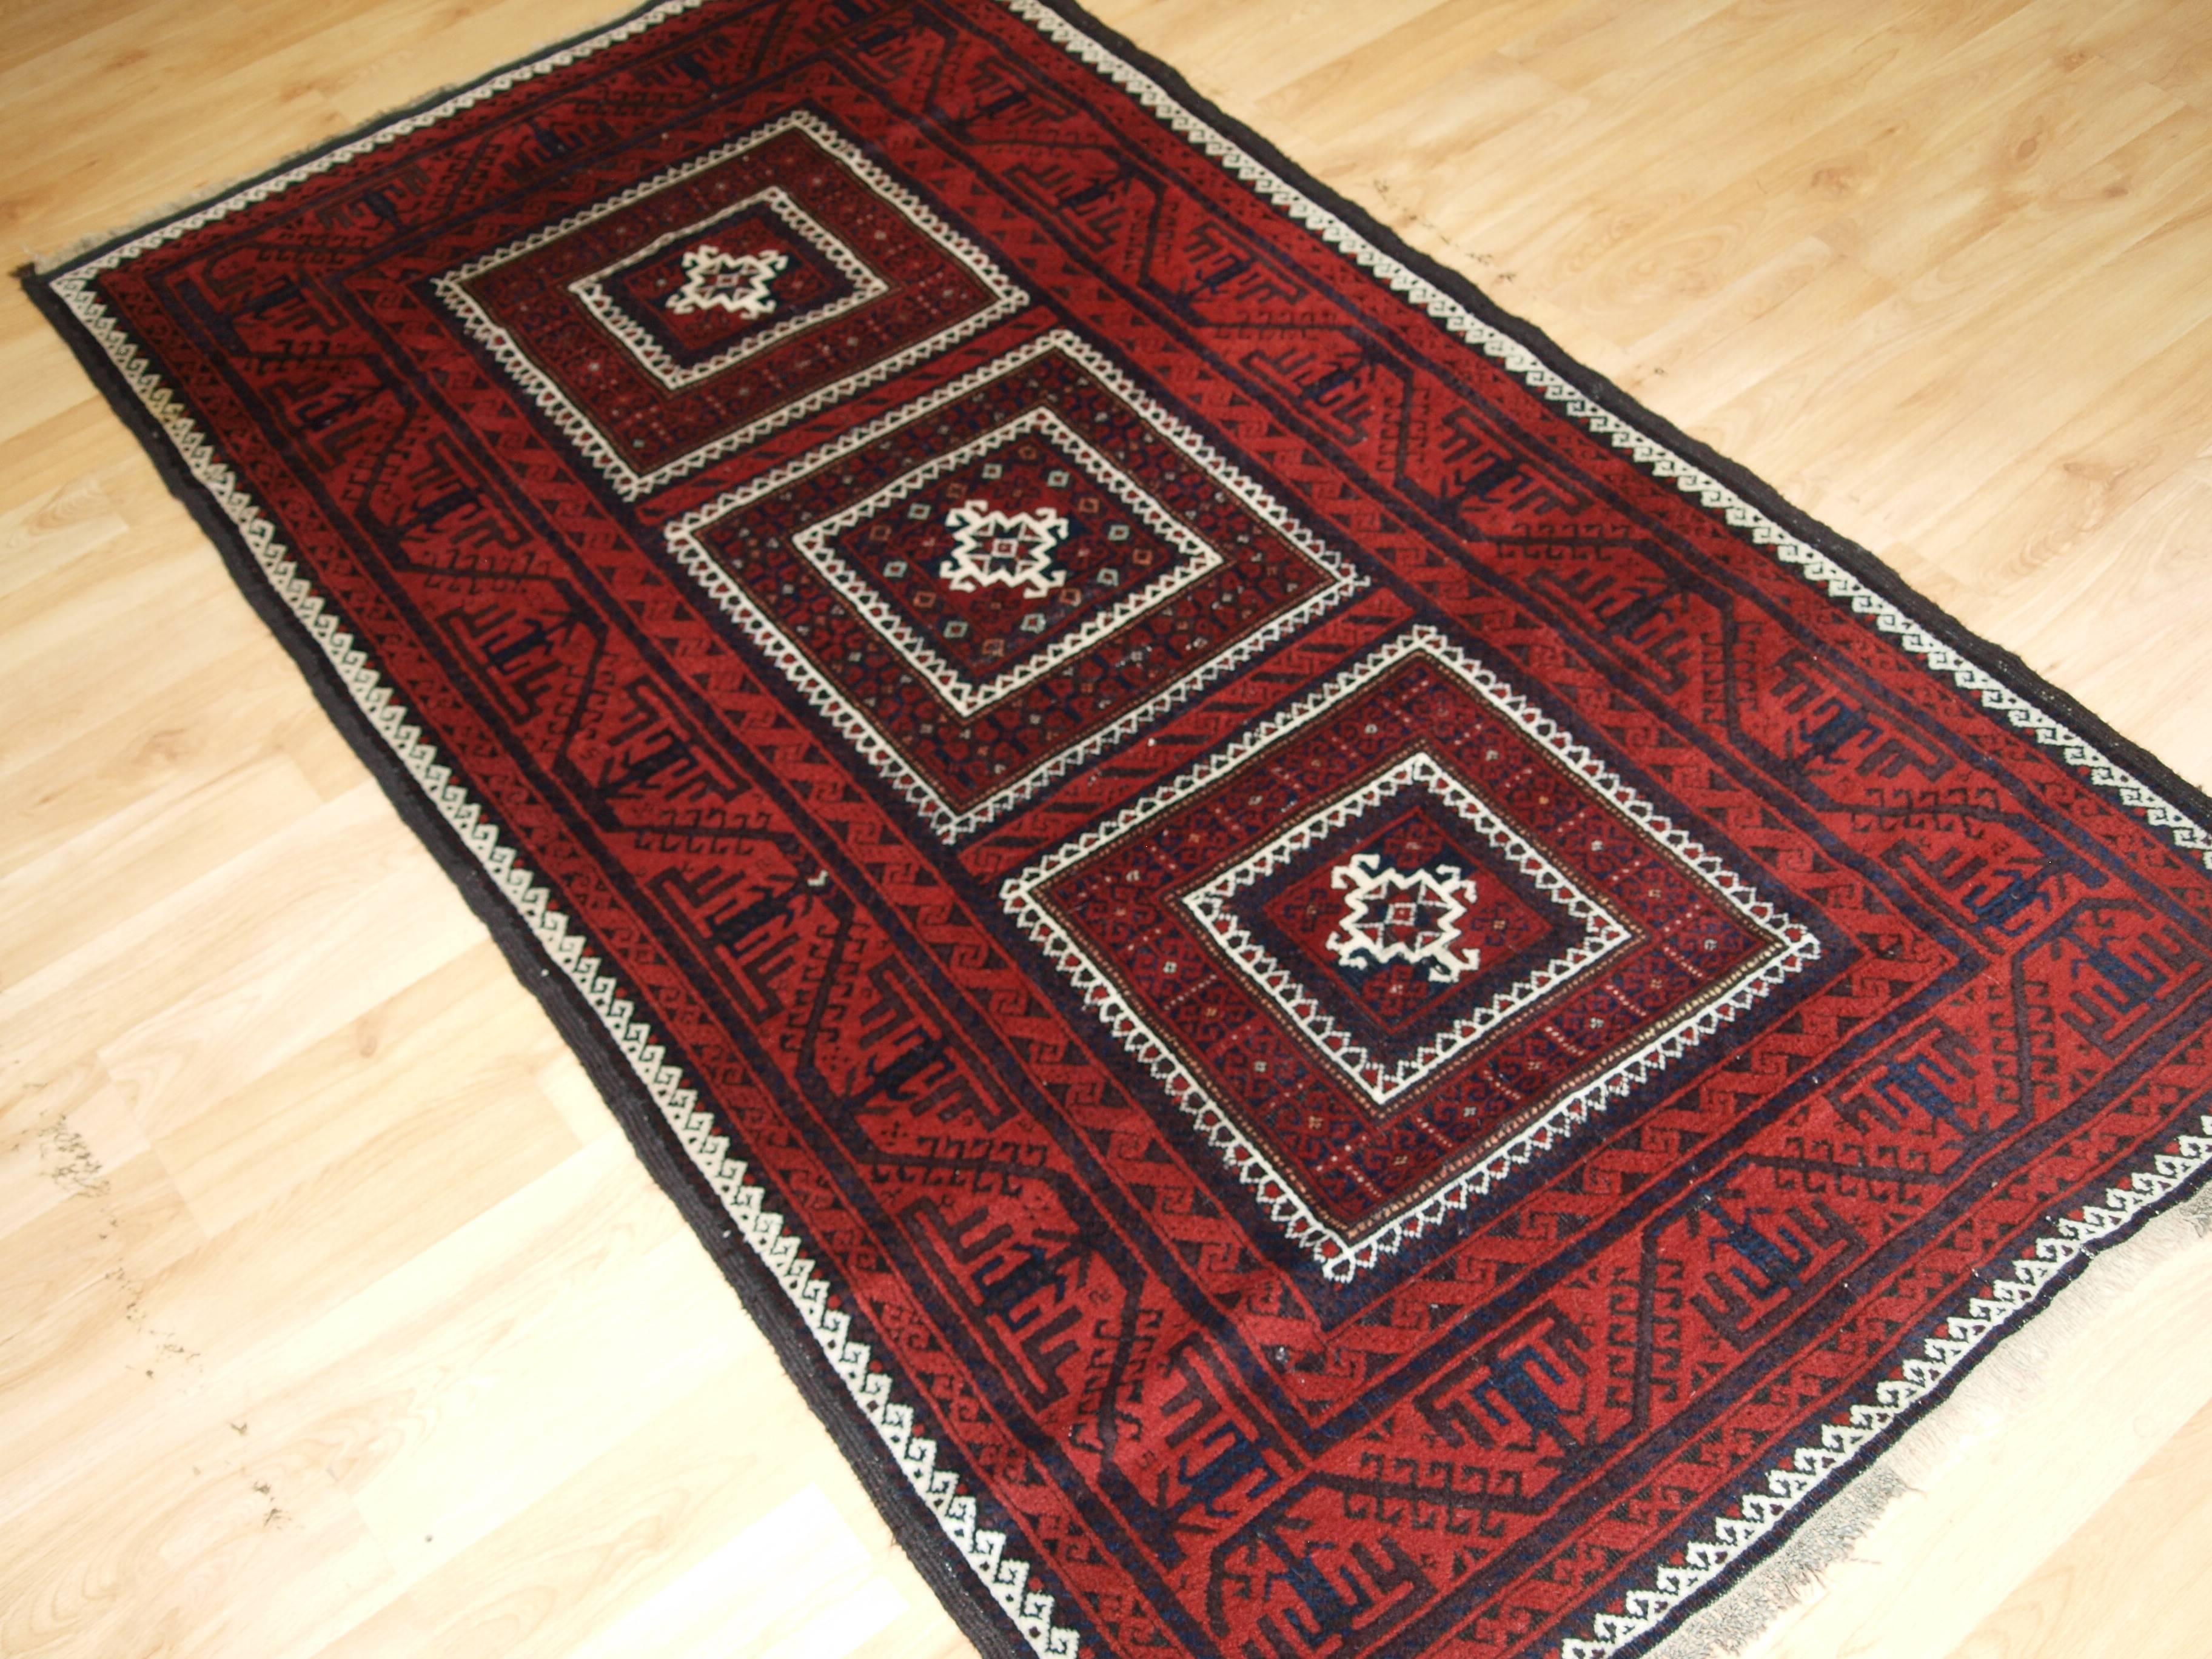 Antique Baluch Rug with Unusual Three Compartment Design, circa 1900 For Sale 2